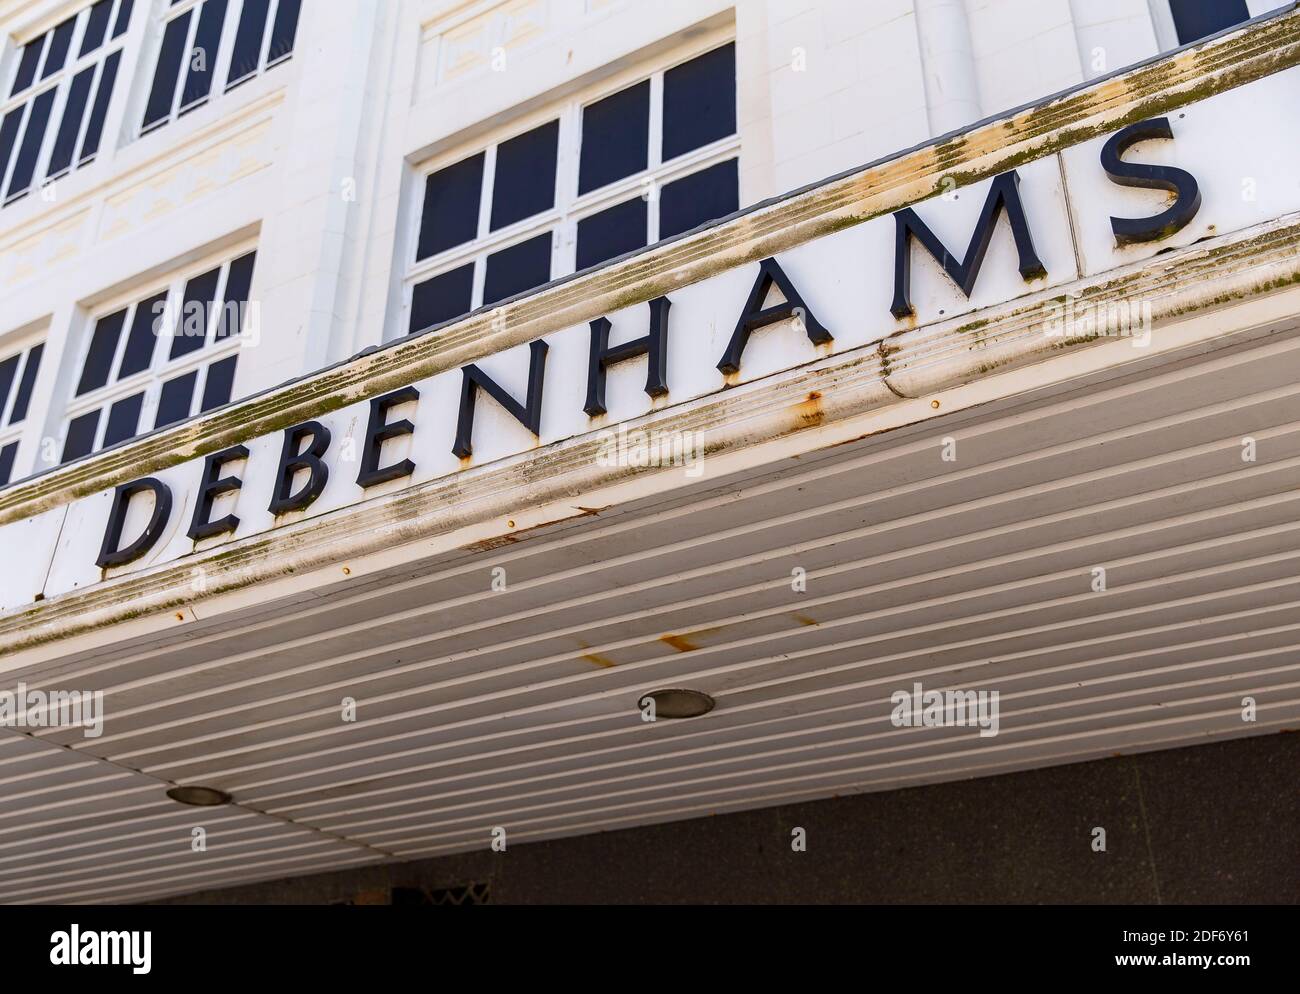 Debenhams in Worthing, currently closed due to Covid-19.  The retailer has announced 22,000 workers jobs are currently at risk.Debenhams announced today, on April 6, 2020 that it was having to file for administration as a consequence of having to shut all its stores across the UK under the covid-19 coronavirus lockdown. This is to be the second time in a year that the struggling retailer has filed for administration. Its present predicament comes not long after its permanent closure of 22 stores, resulting in more than 700 job losses, with a further 28 already slated for closure in 2021. Brita Stock Photo